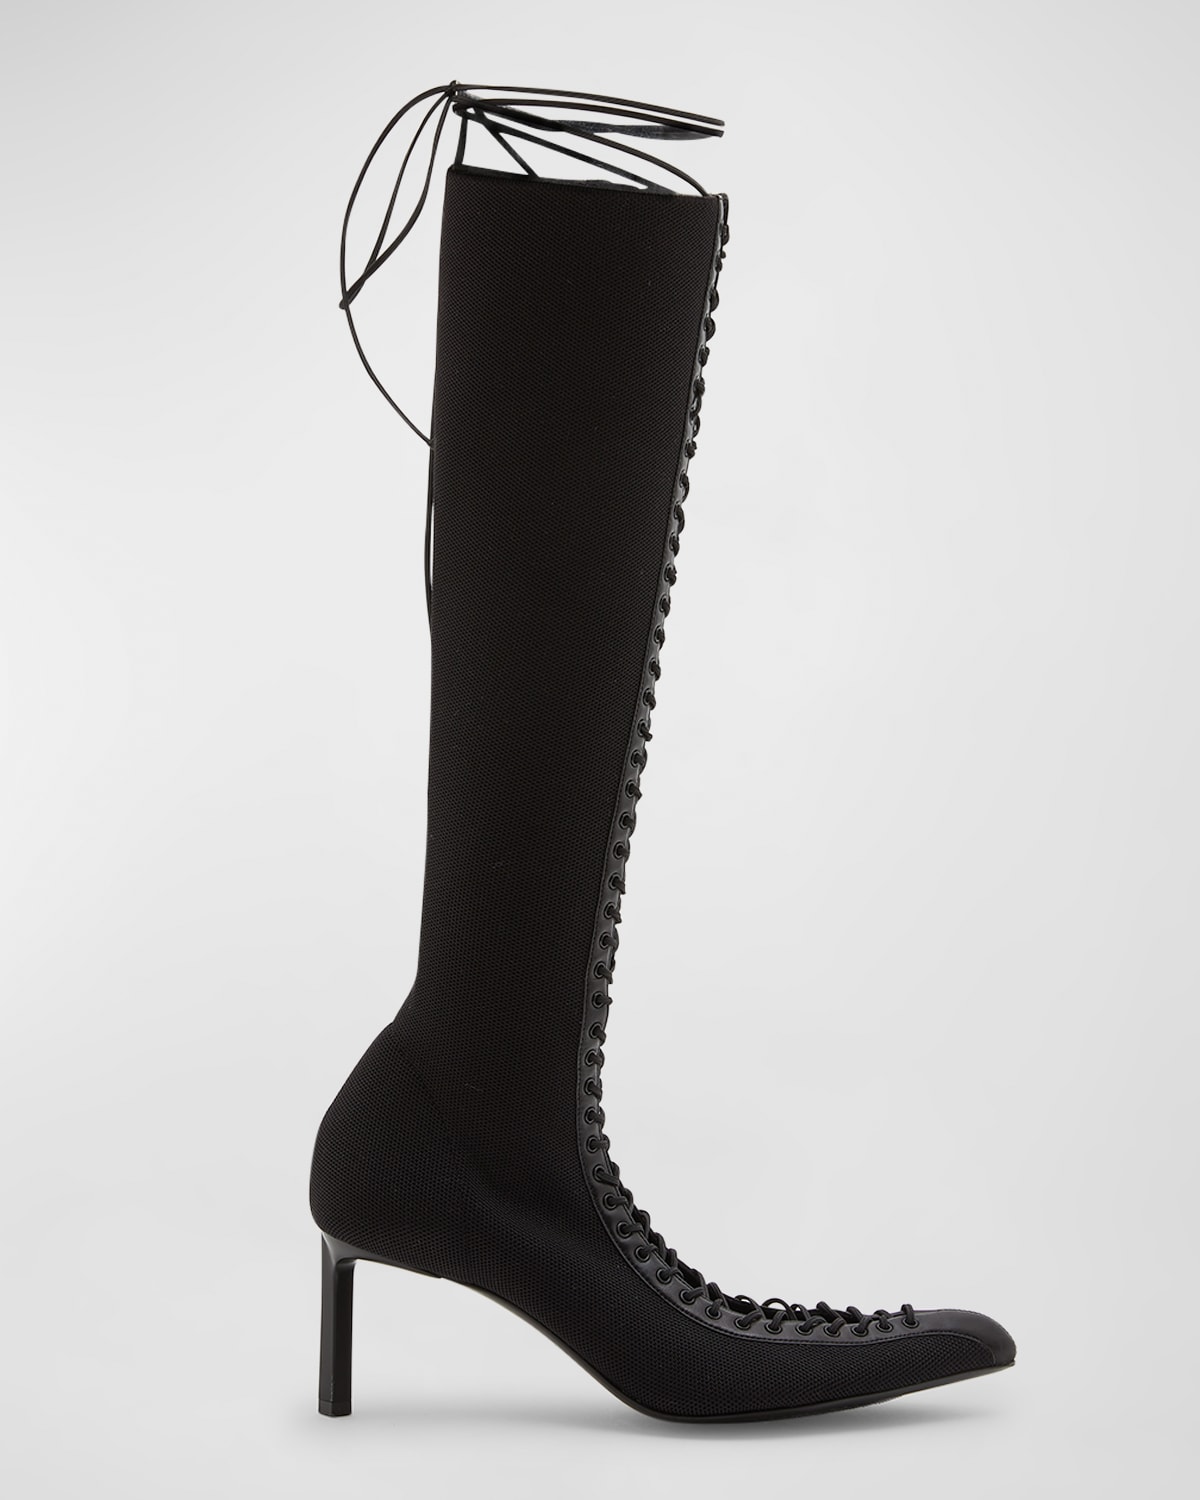 Total 47+ imagen neiman marcus givenchy boots - Abzlocal.mx